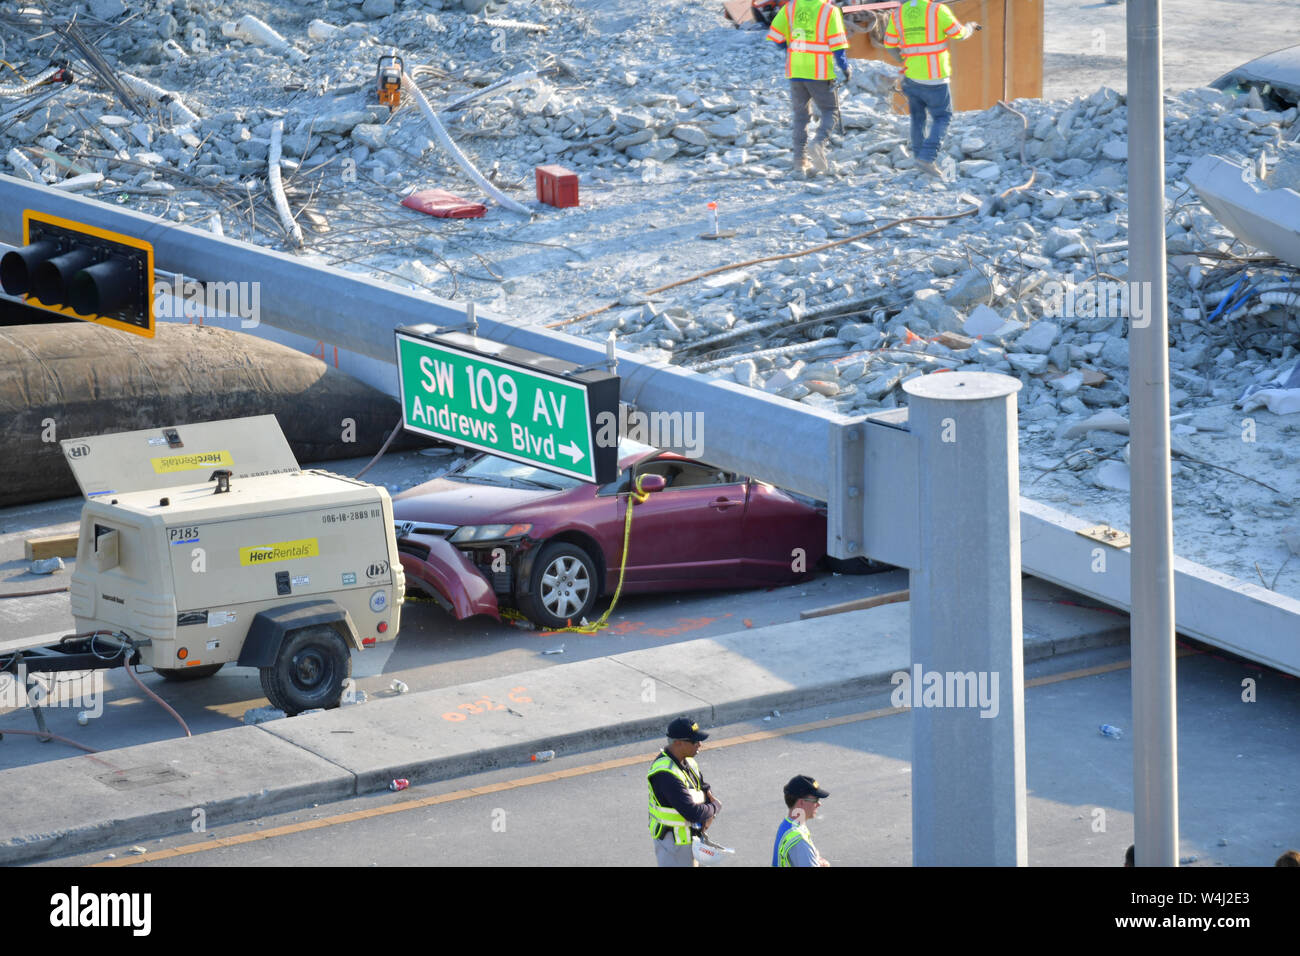 MIAMI, FL - MARCH 17: Crack on Florida Bridge Was Discussed in Meeting Hours Before Collapse - Scene where a pedestrian bridge collapsed a few days after it was built over southwest 8th street allowing people to bypass the busy street to reach Florida International University on March 17, 2018 in Miami, Florida. Reports indicate that there are at least 6 fatalities as a result of the collapse, which crushed at least five cars. Fireman remove rubble delicately by hand in respect for the deceased and their families  People:  Atmosphere Stock Photo